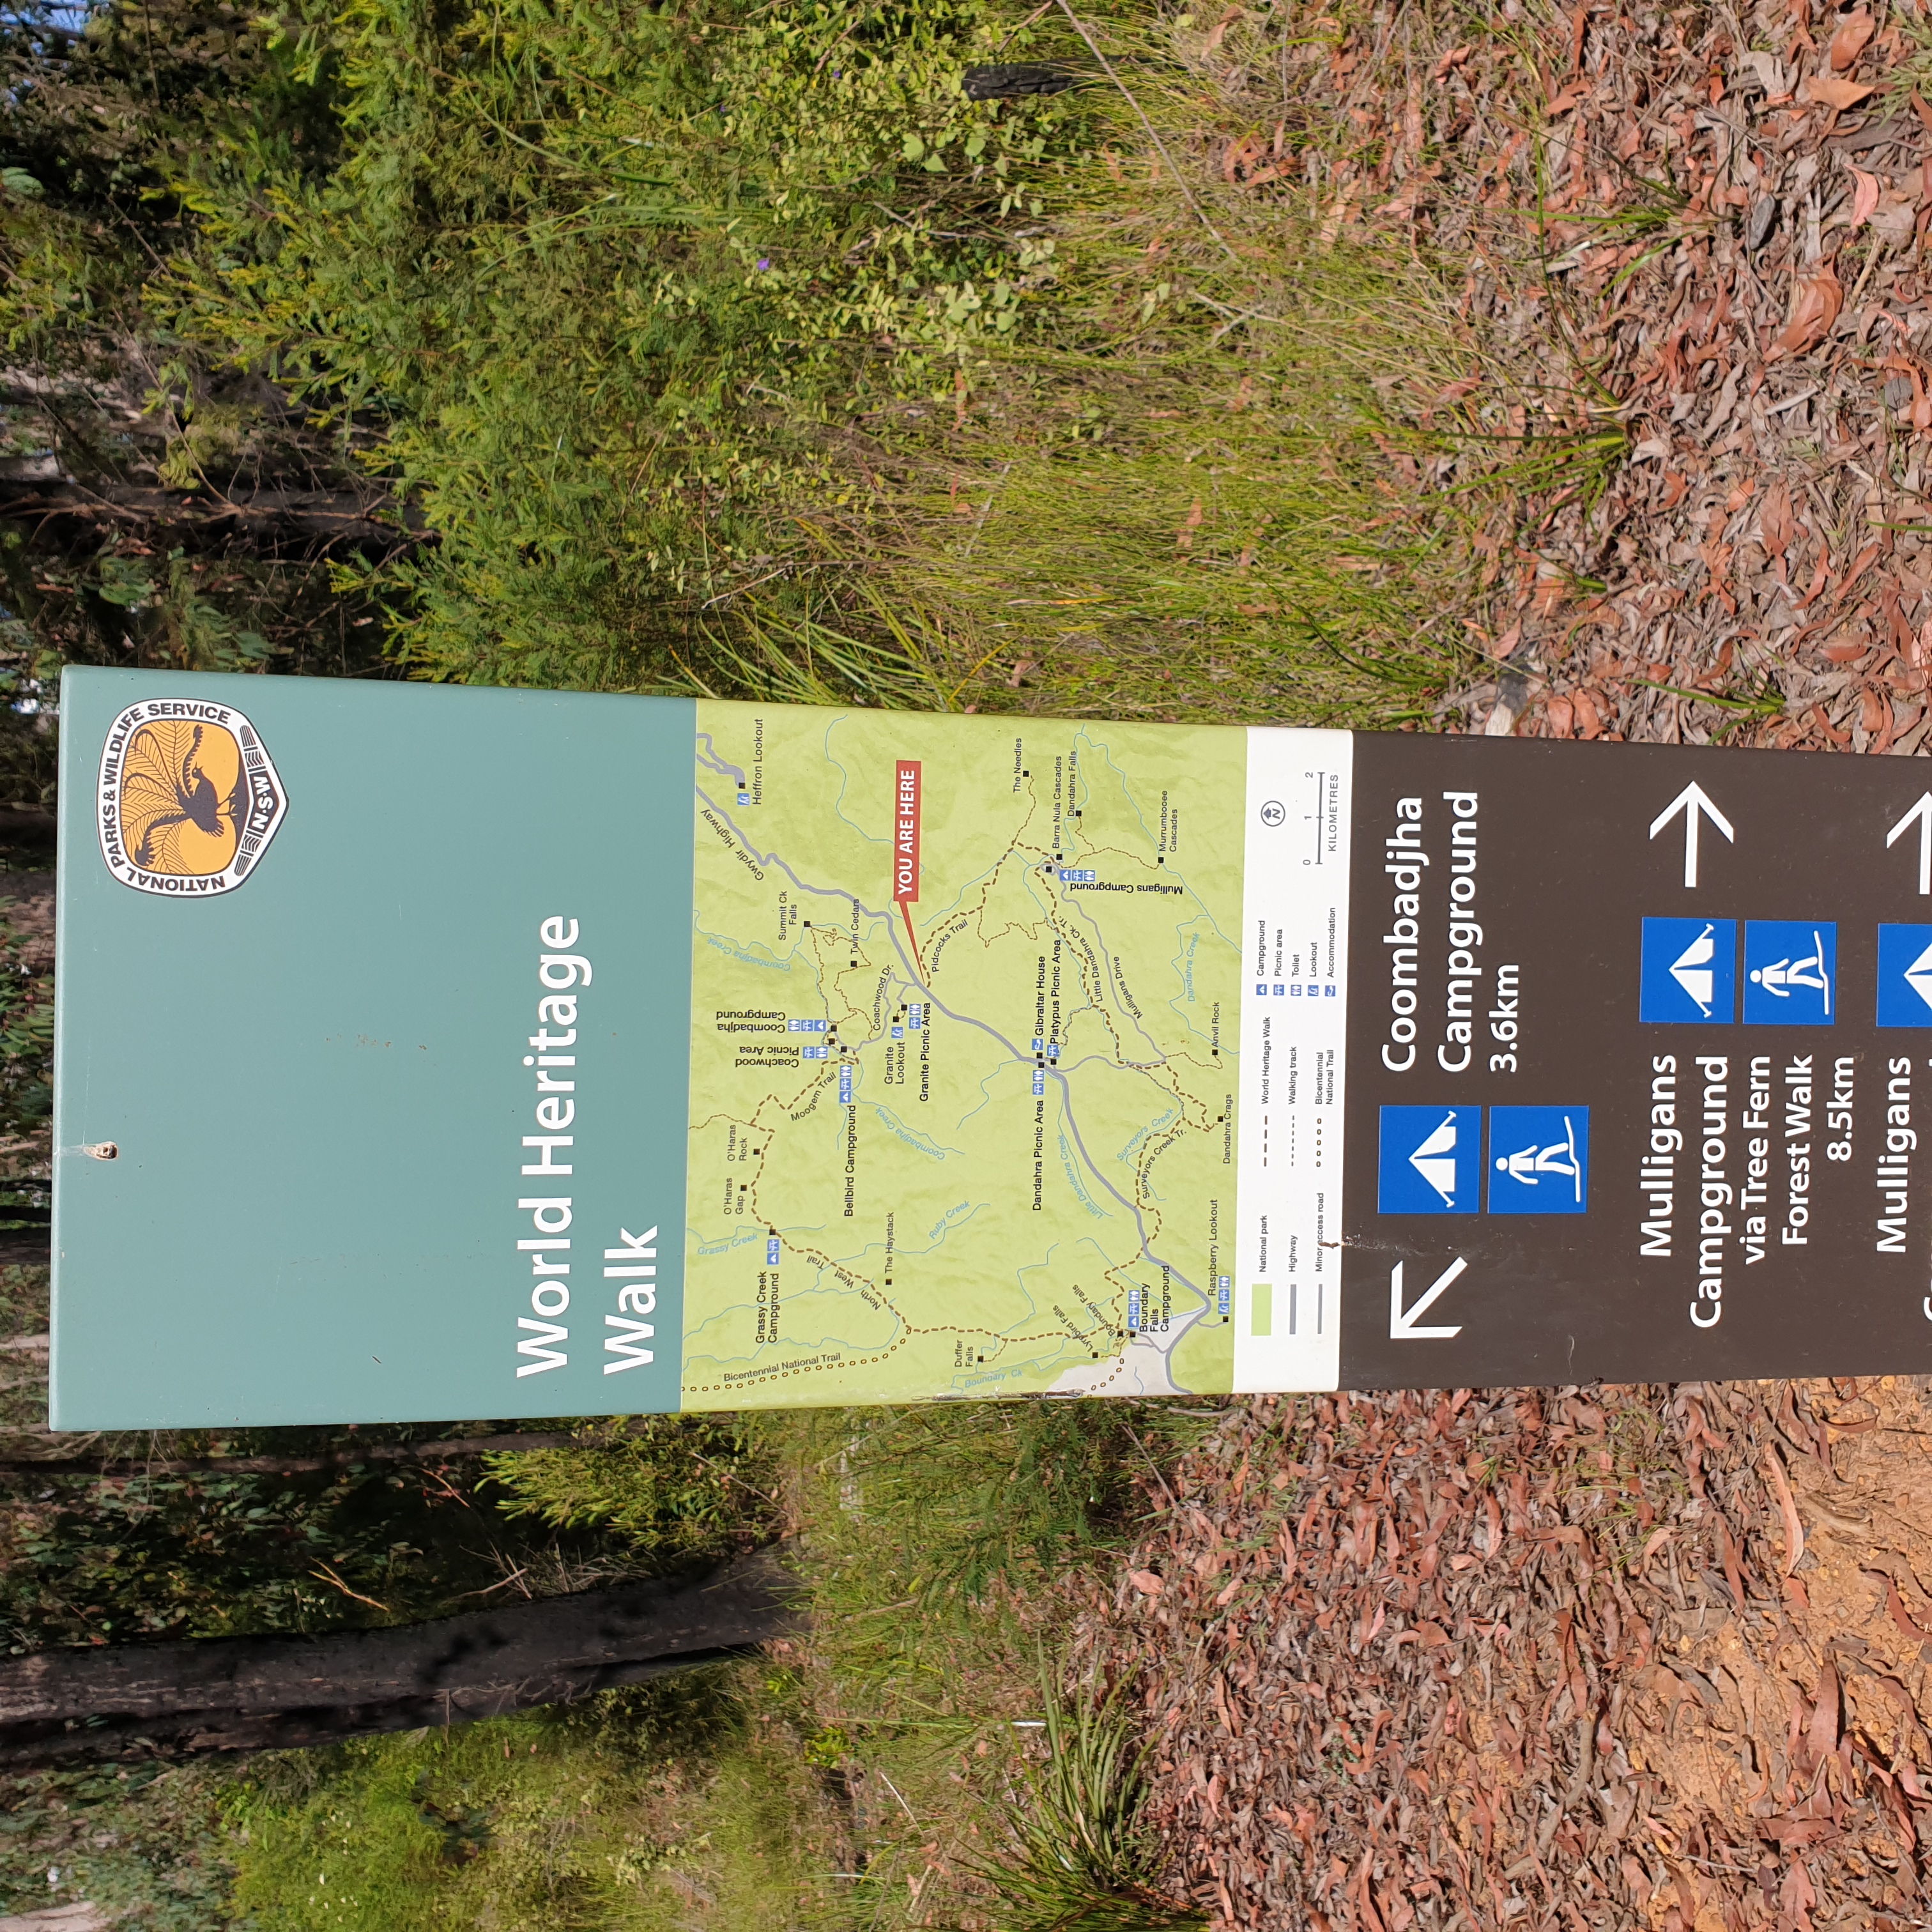 An excellent track head sign at the begining of Pidcocks Trail, Gibraltar Range NP